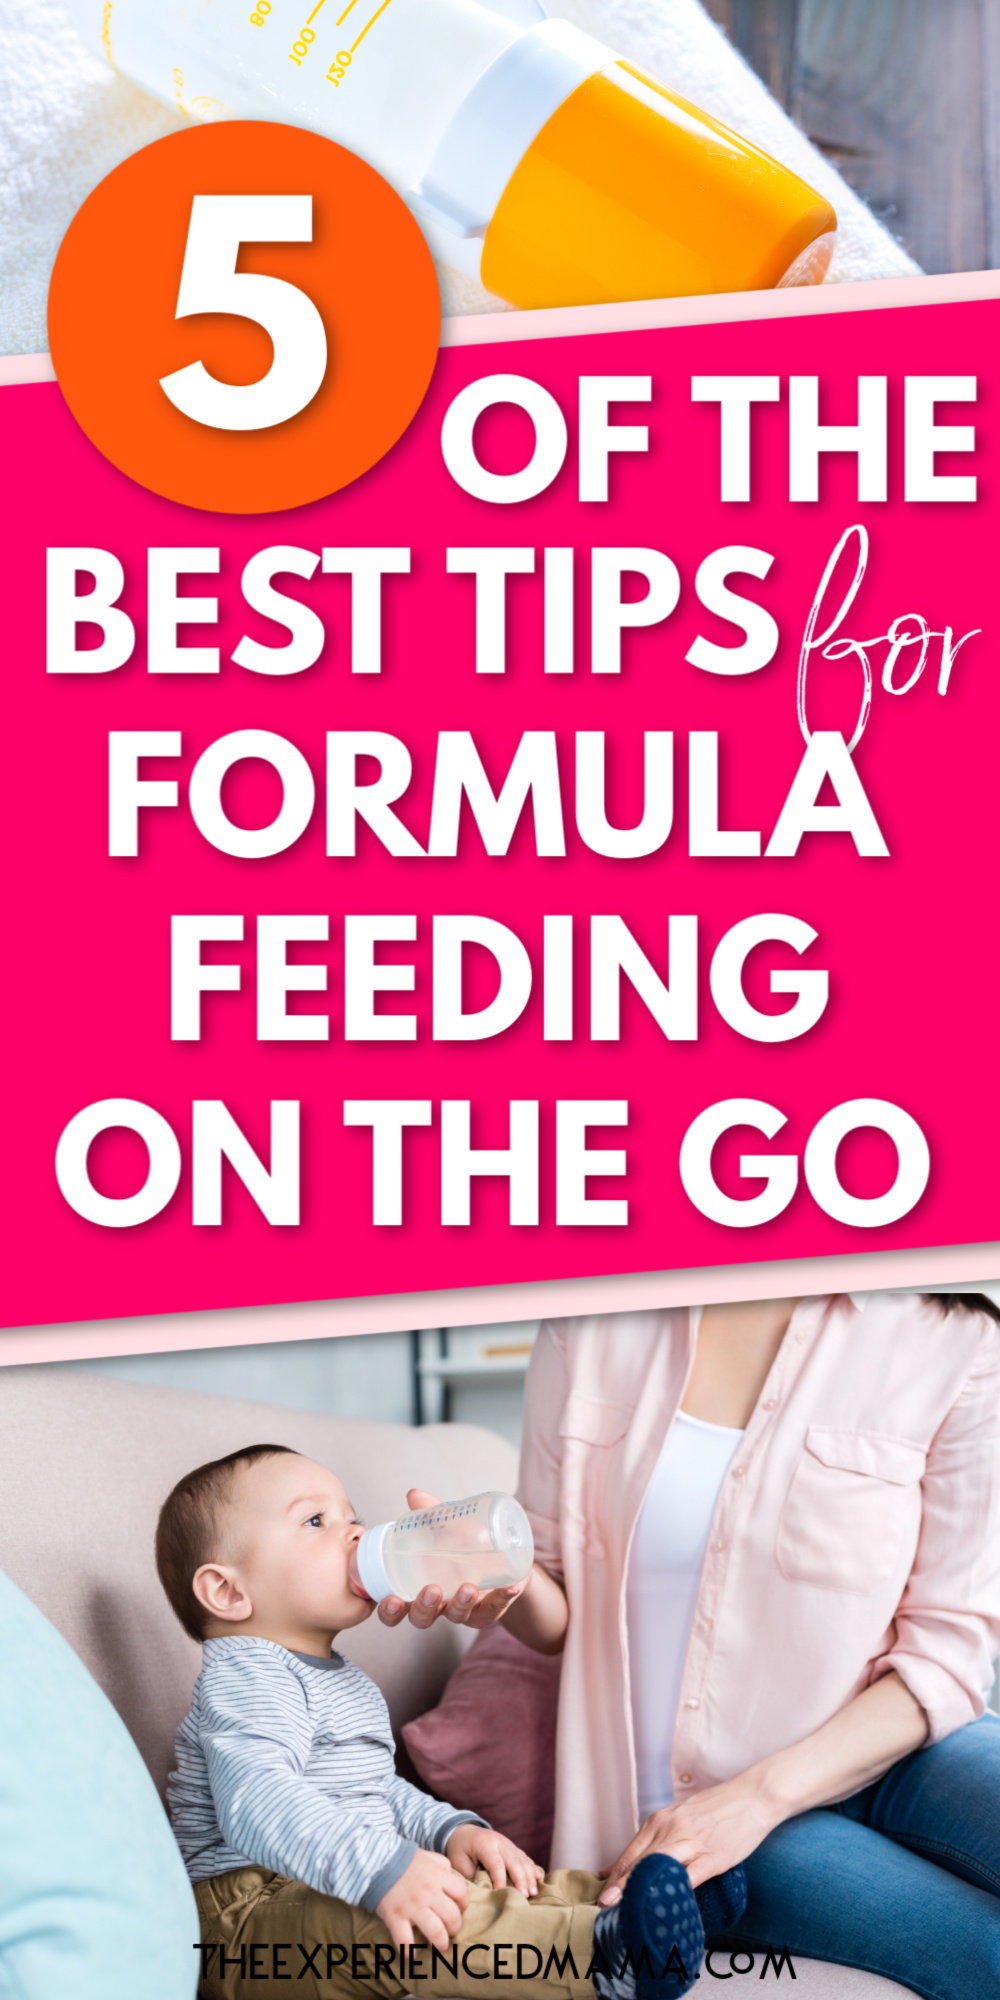 formula feeding concept with text overlay, "5 of the best tips for formula feeding on the go"